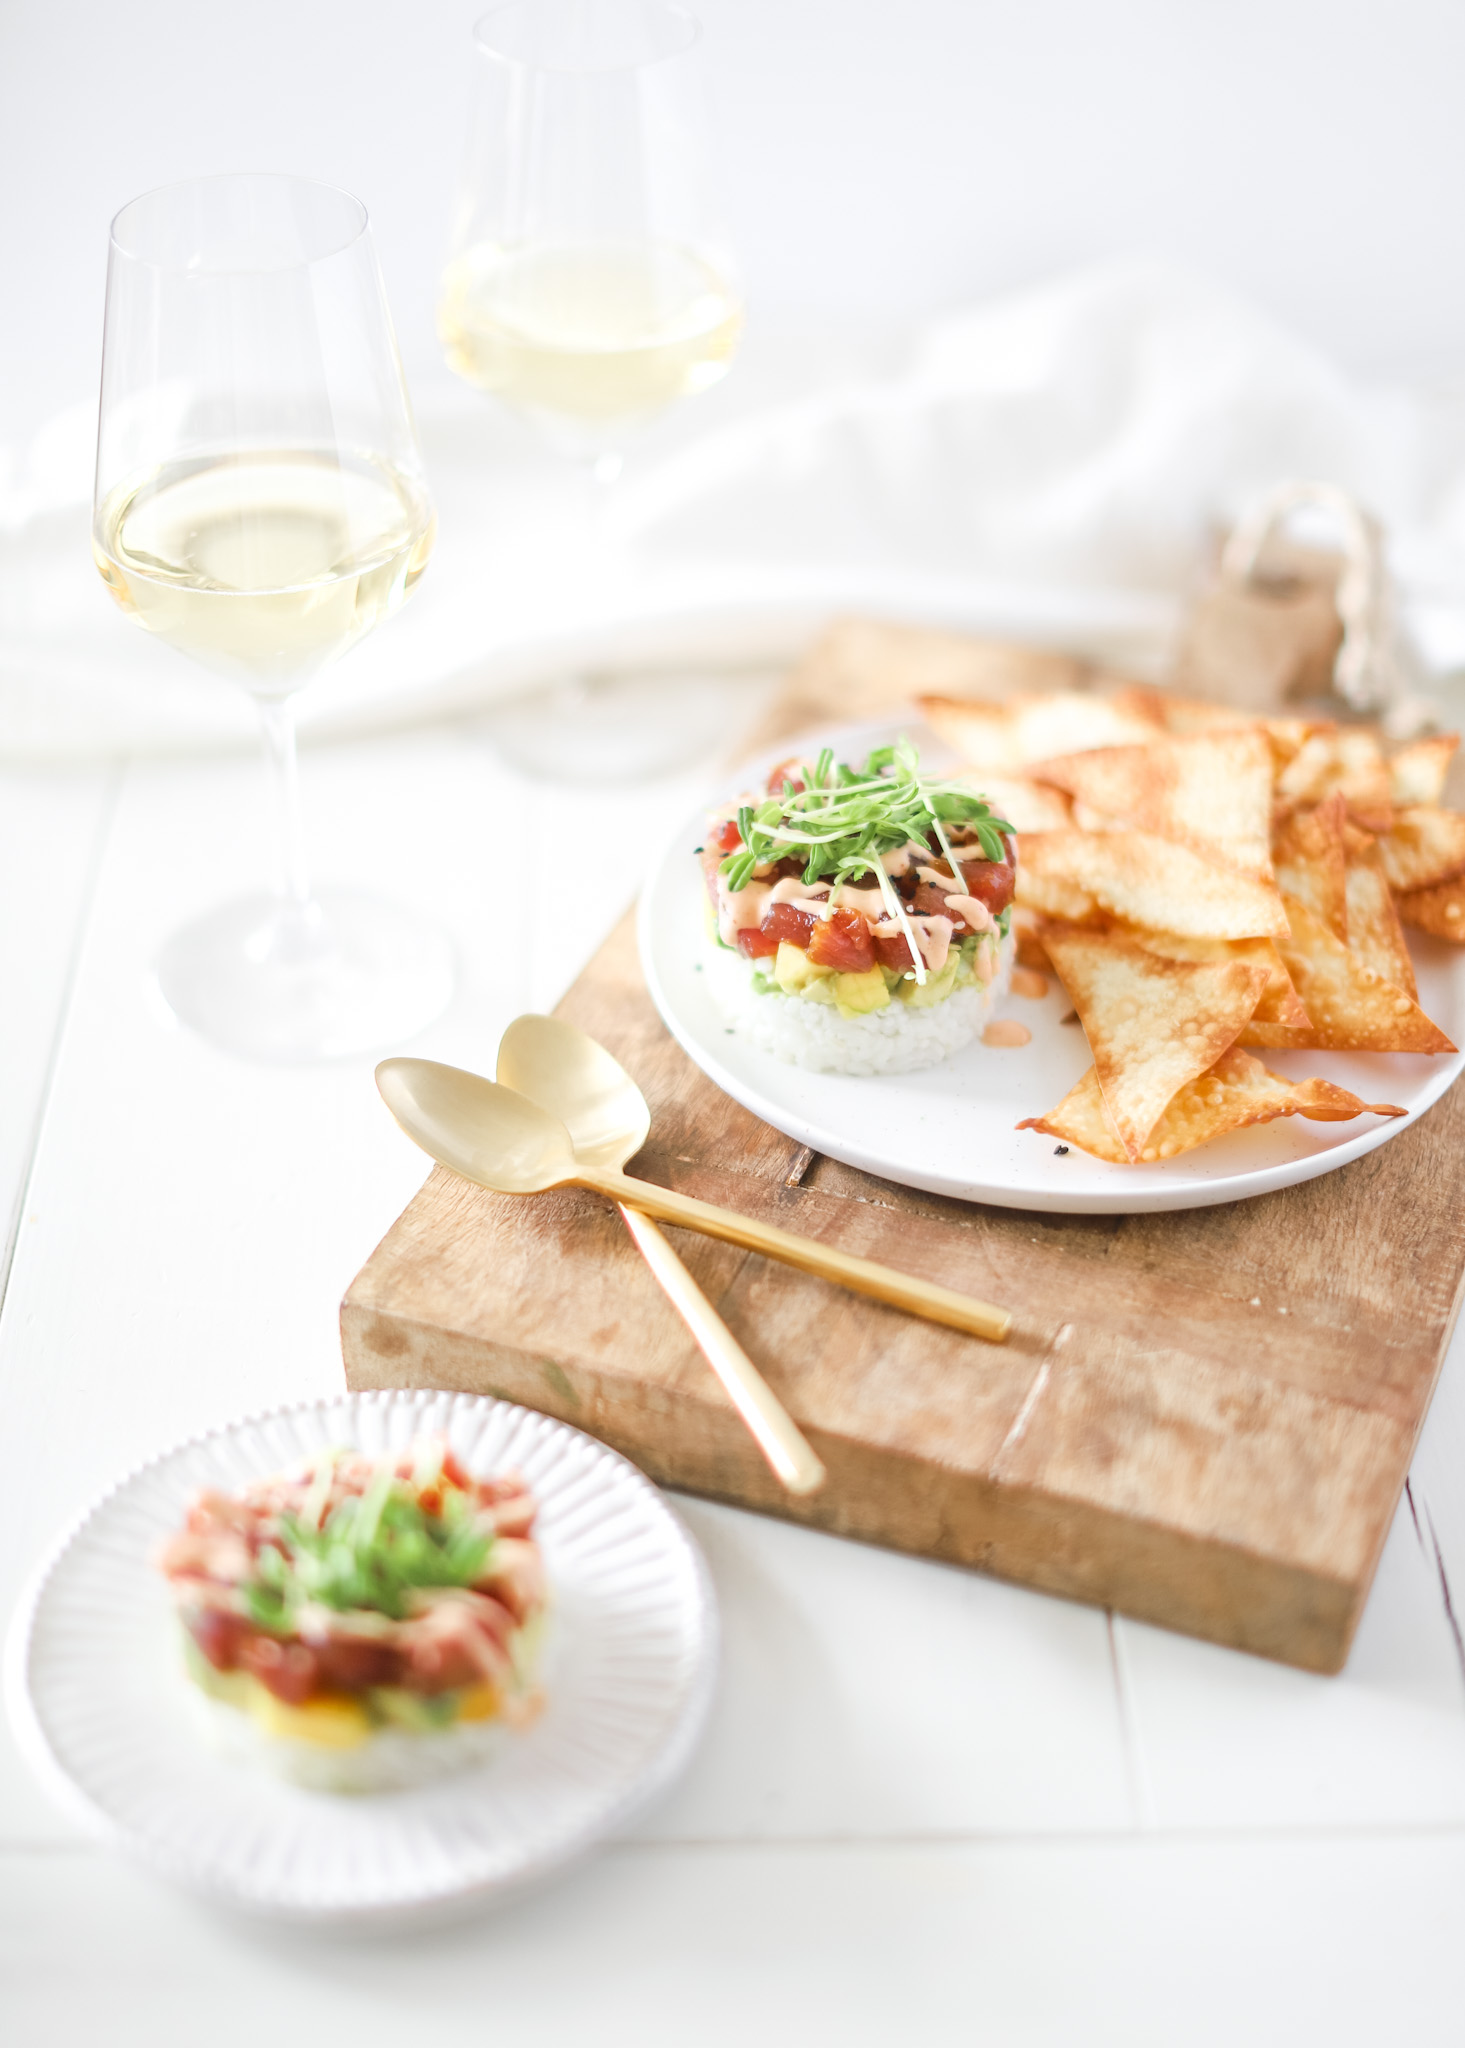 tuna stack with wonton chips on plate with two spoons and glasses of wine